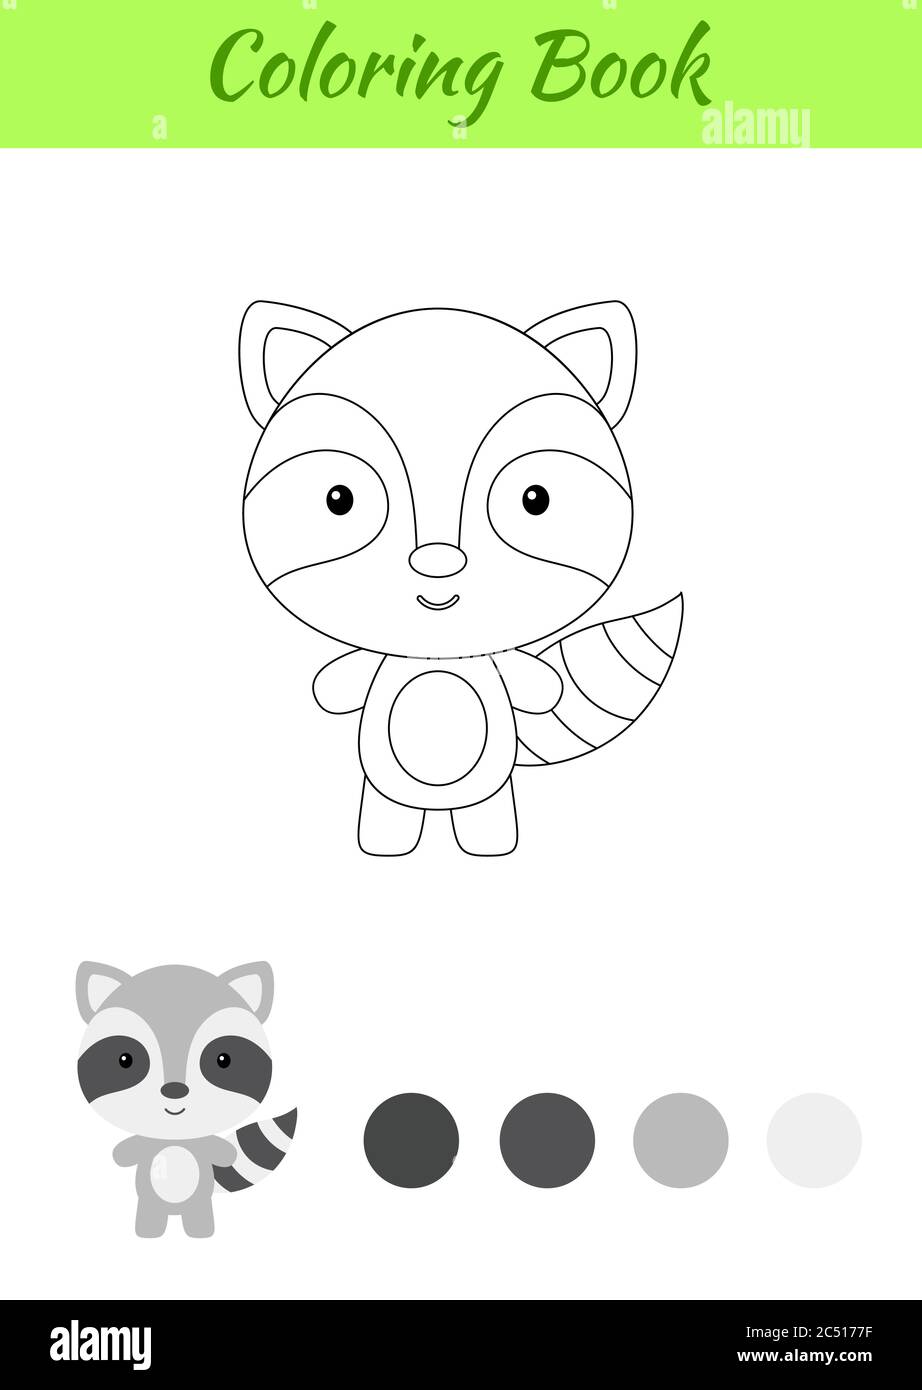 Coloring page happy little baby raccoon coloring book for kids educational activity for preschool years kids and toddlers with cute animal stock vector image art